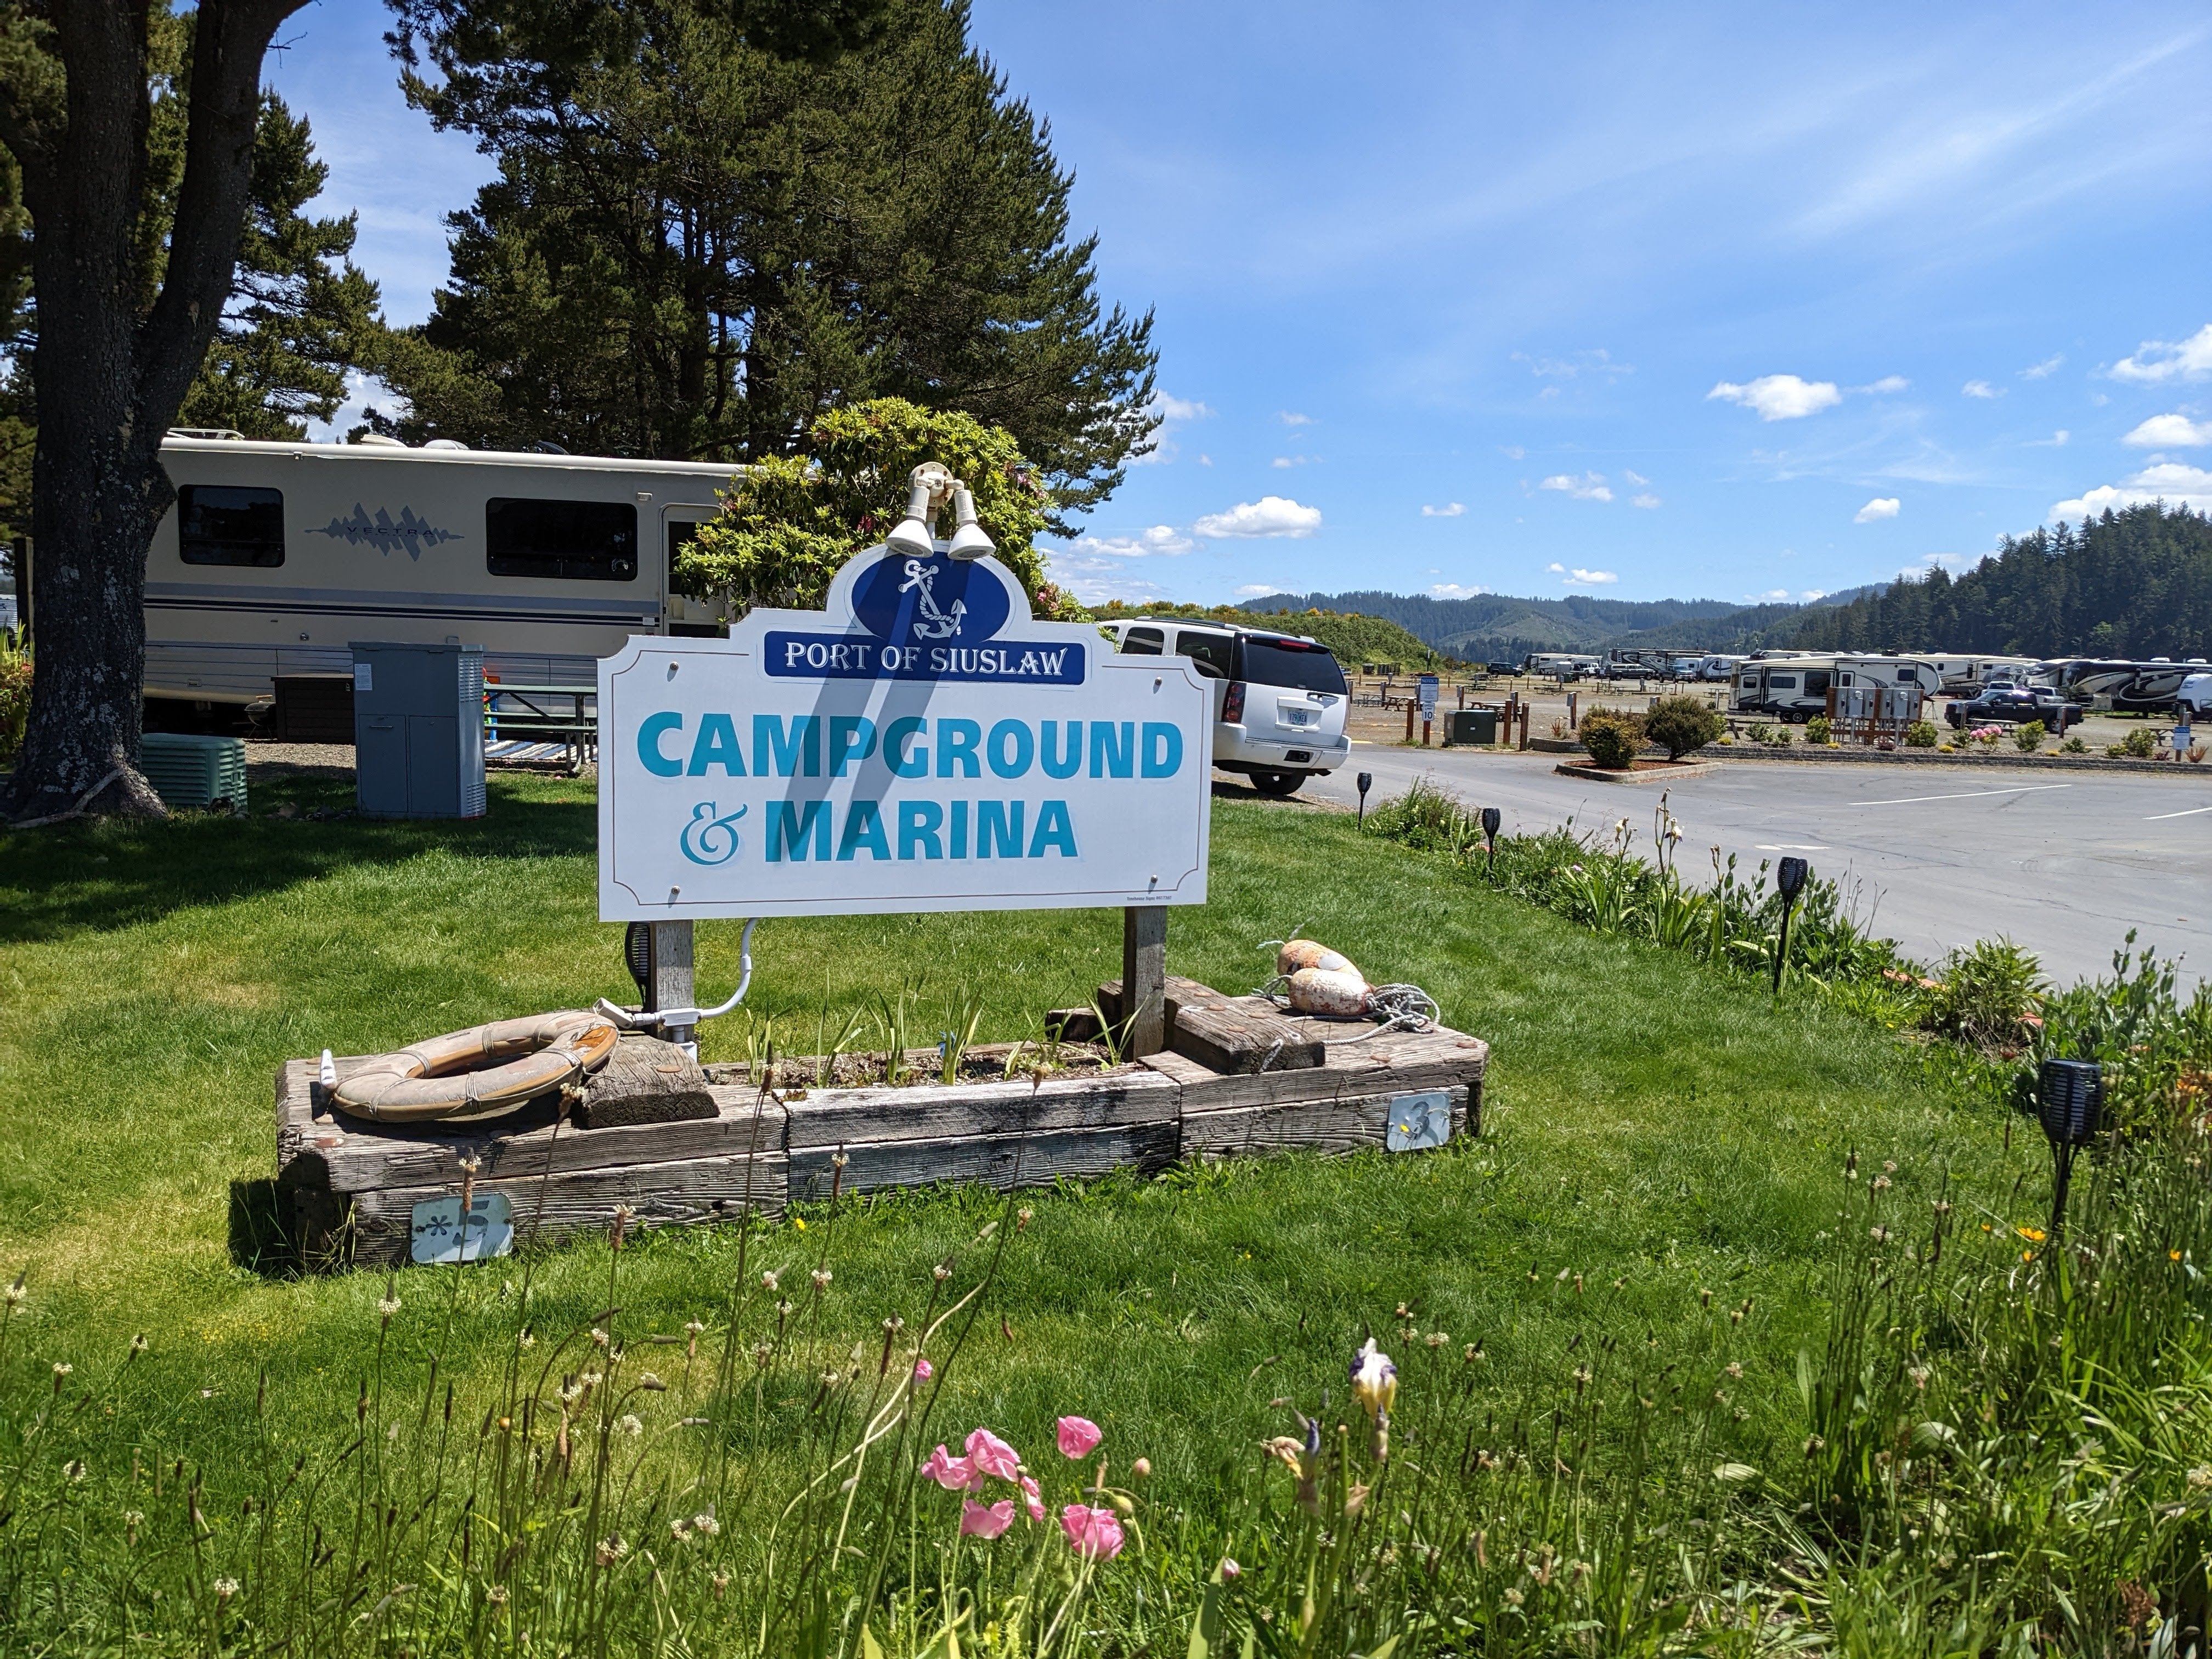 Camper submitted image from Port of Siuslaw Campground & Marina - 1